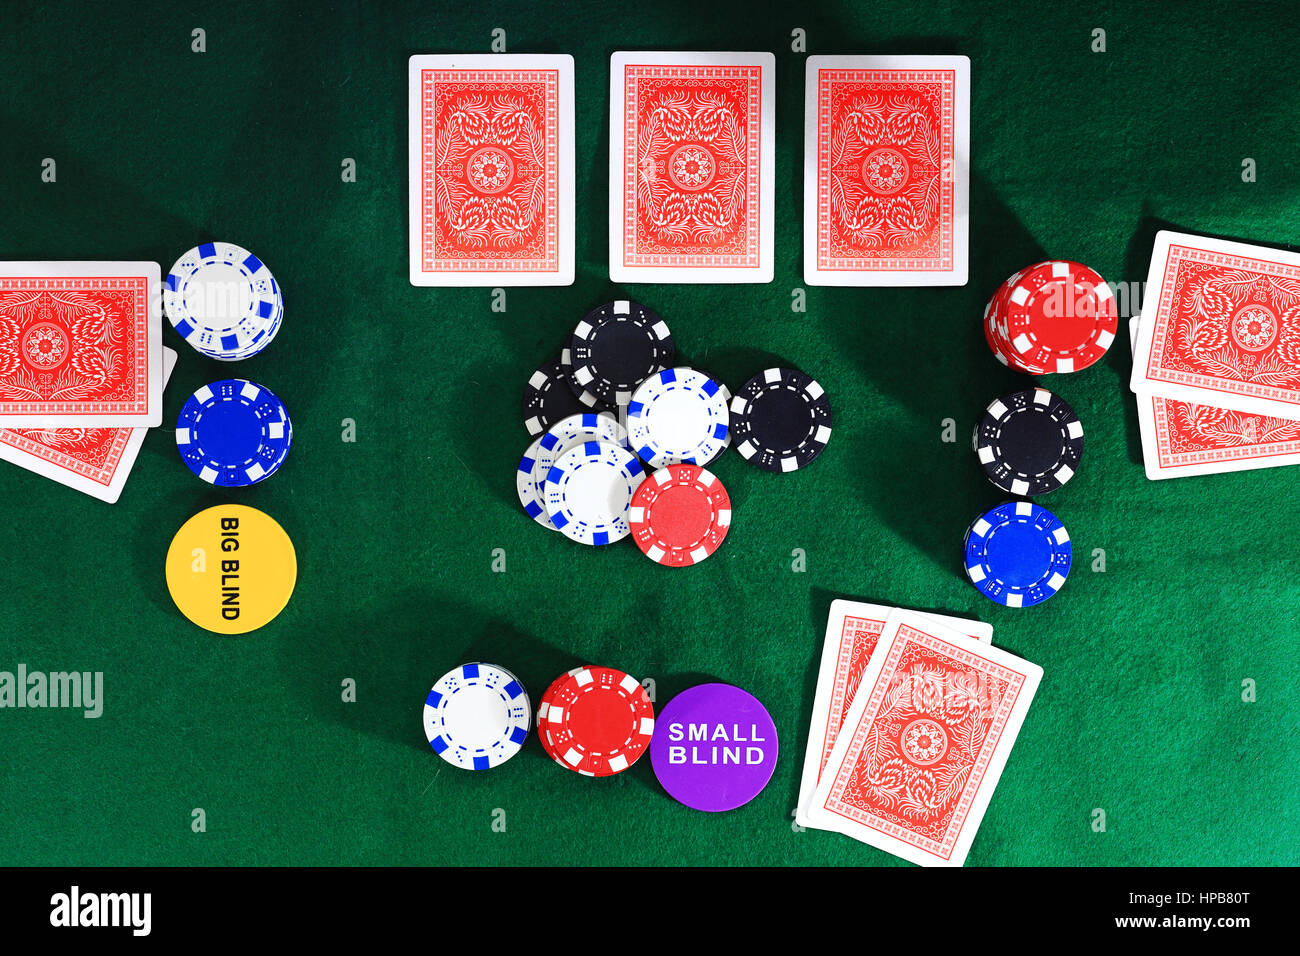 Top view of poker play . Close up of poker round. Casino chips and cards on green table. Games of chance background. Online casino concept Stock Photo